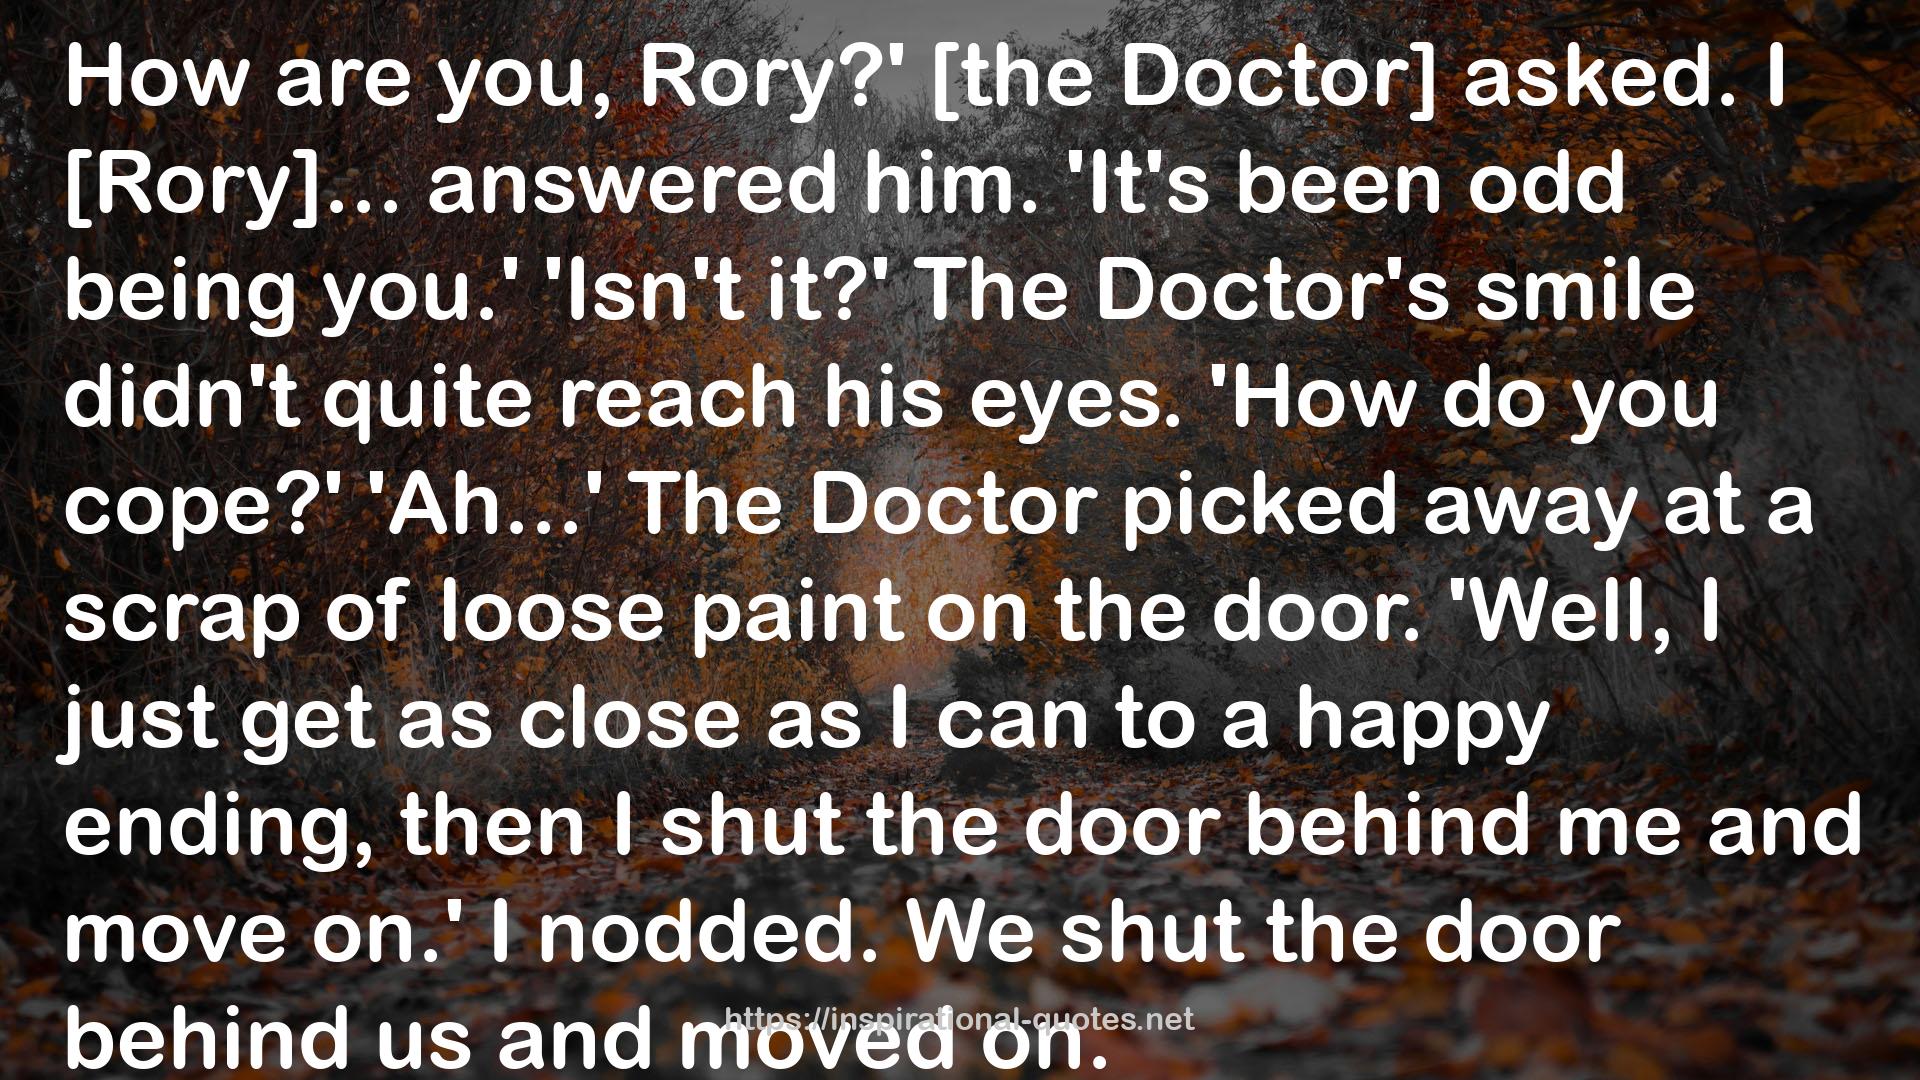 The Doctor's smile  QUOTES